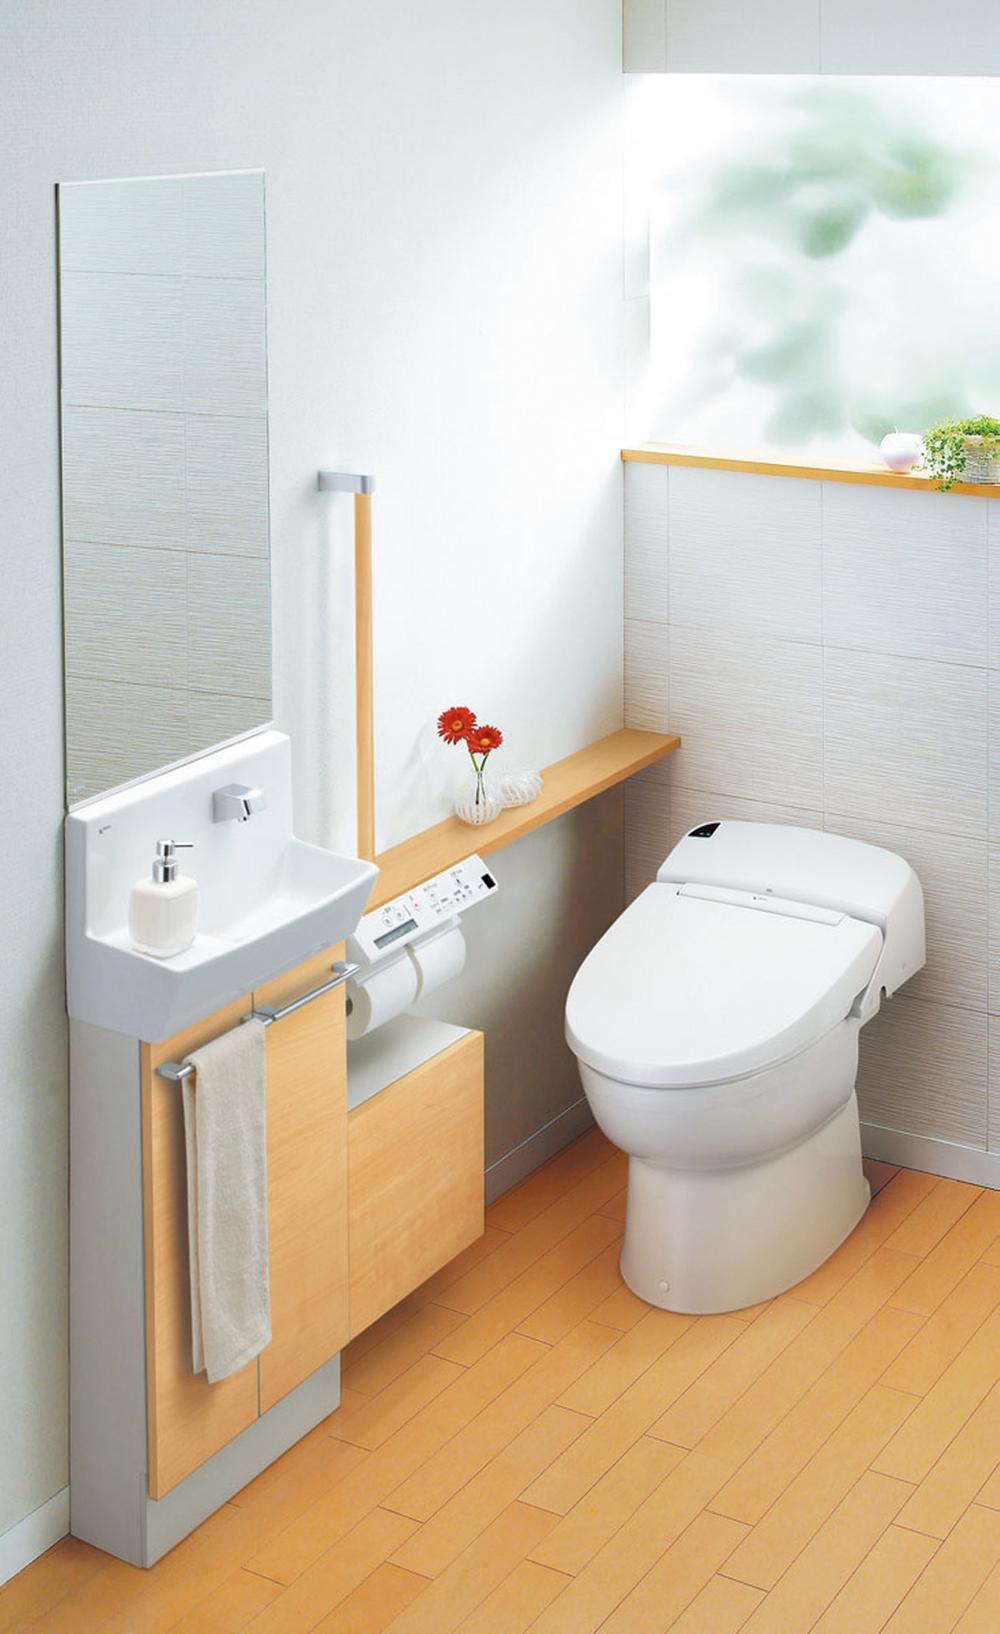 Other Equipment. Neat compact body tankless toilet. Easy to use and functional has adopted a counter or wall remote control (1 floor only). 